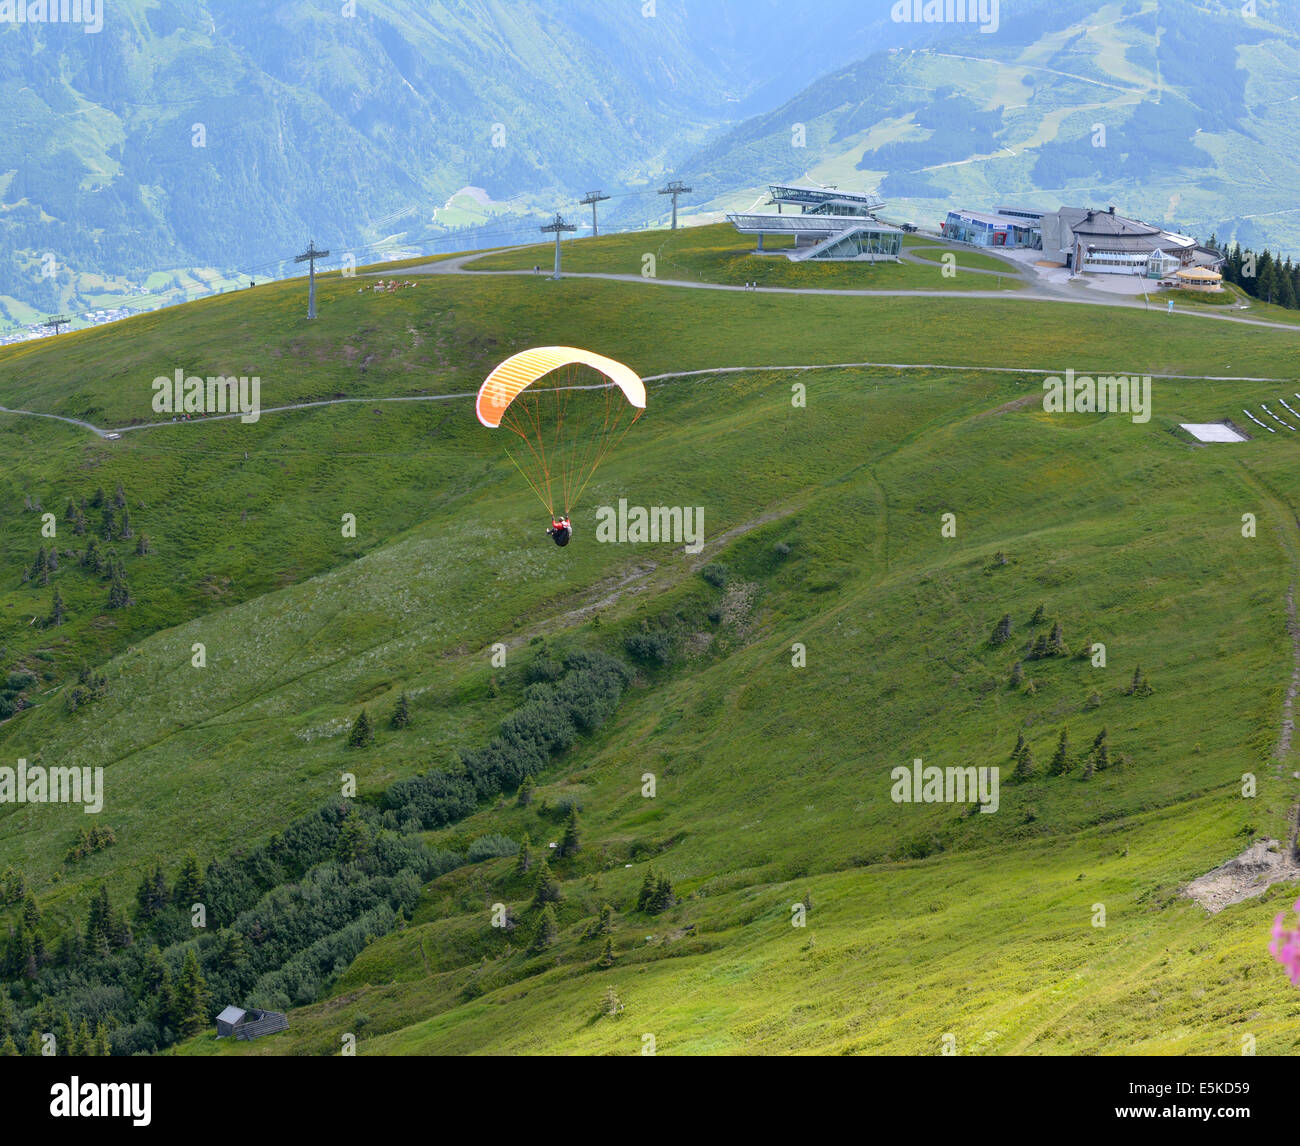 Paragliding in the Austrian Alps mountains Stock Photo